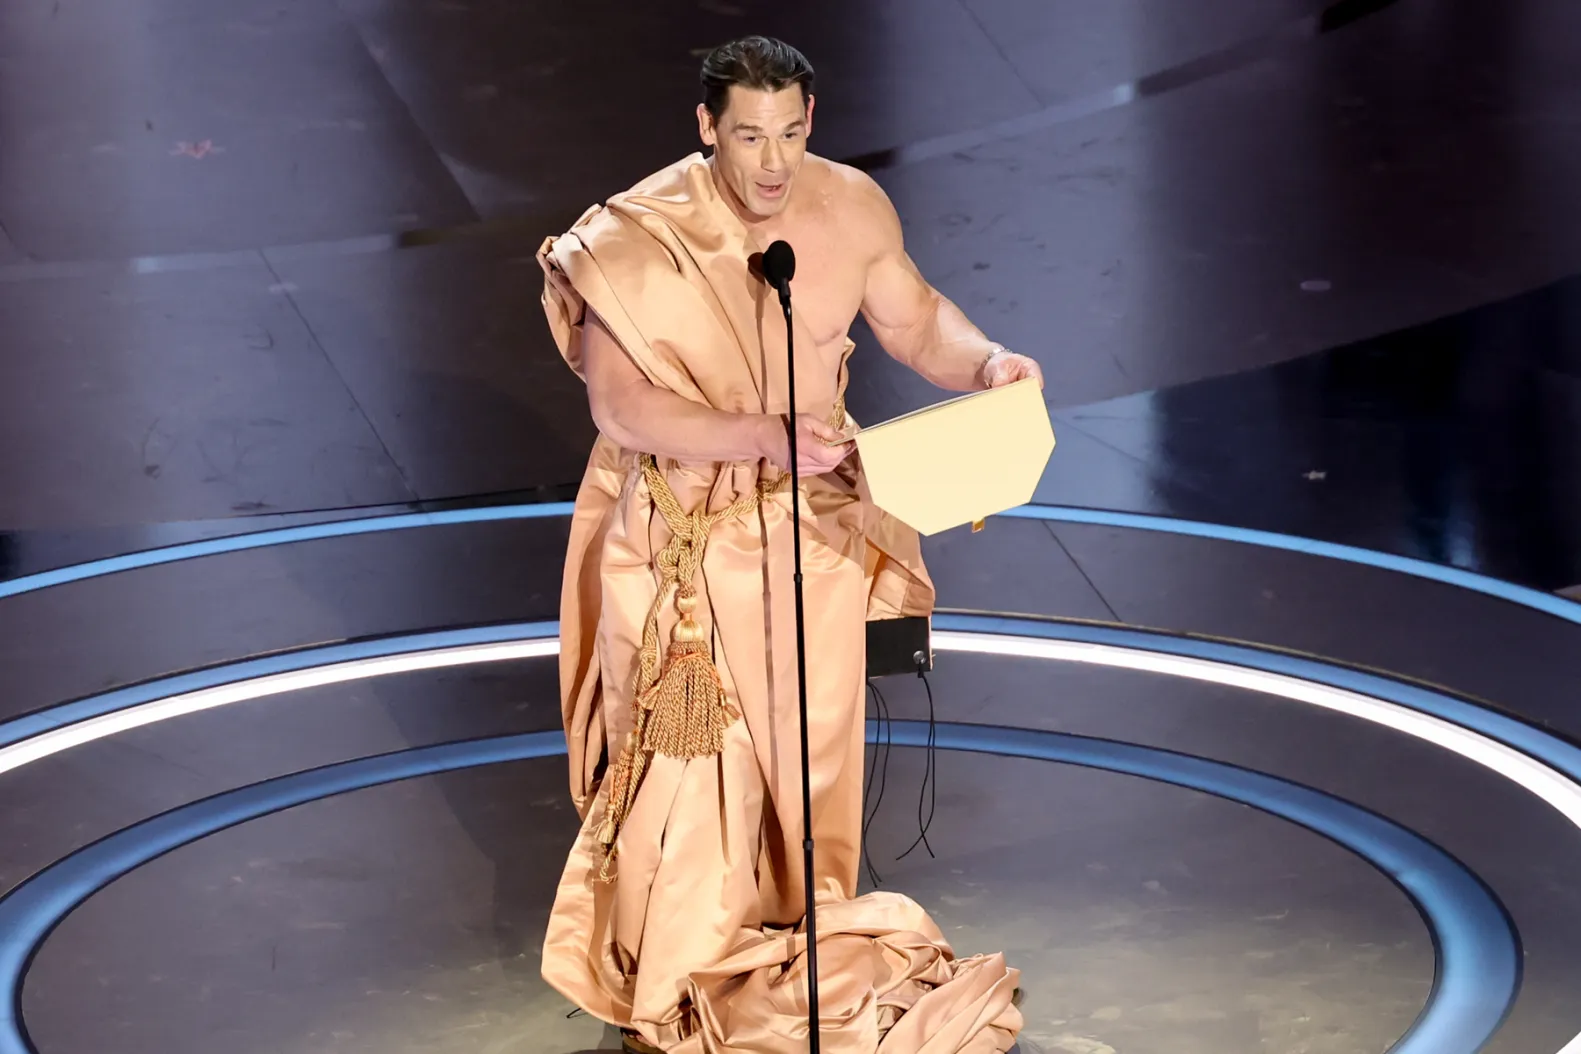 Best (And Worst) Moments of the Oscars, From Emma Stone to John Cena